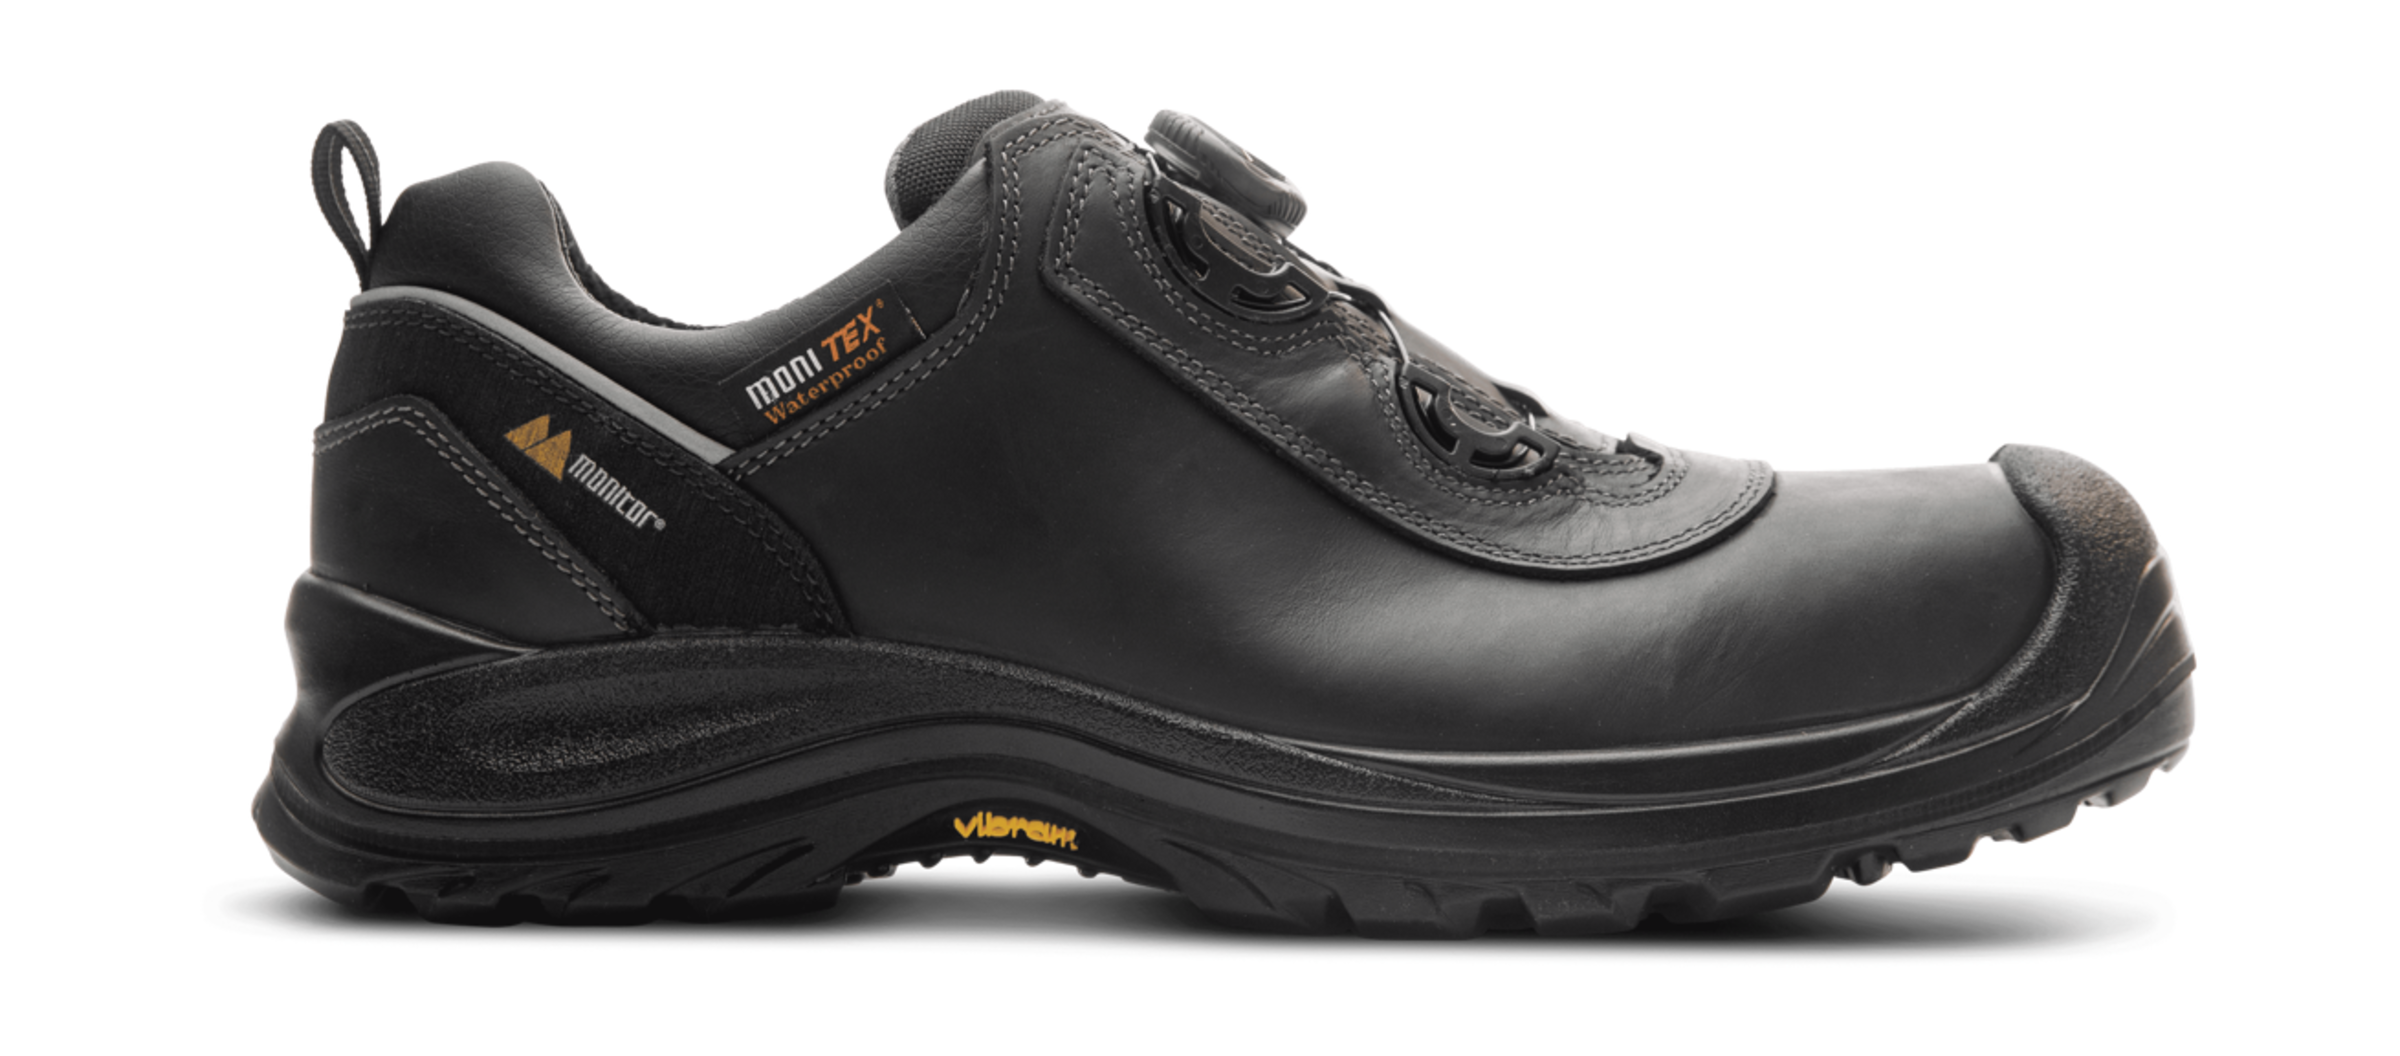 Monitor Assault Safety Shoe